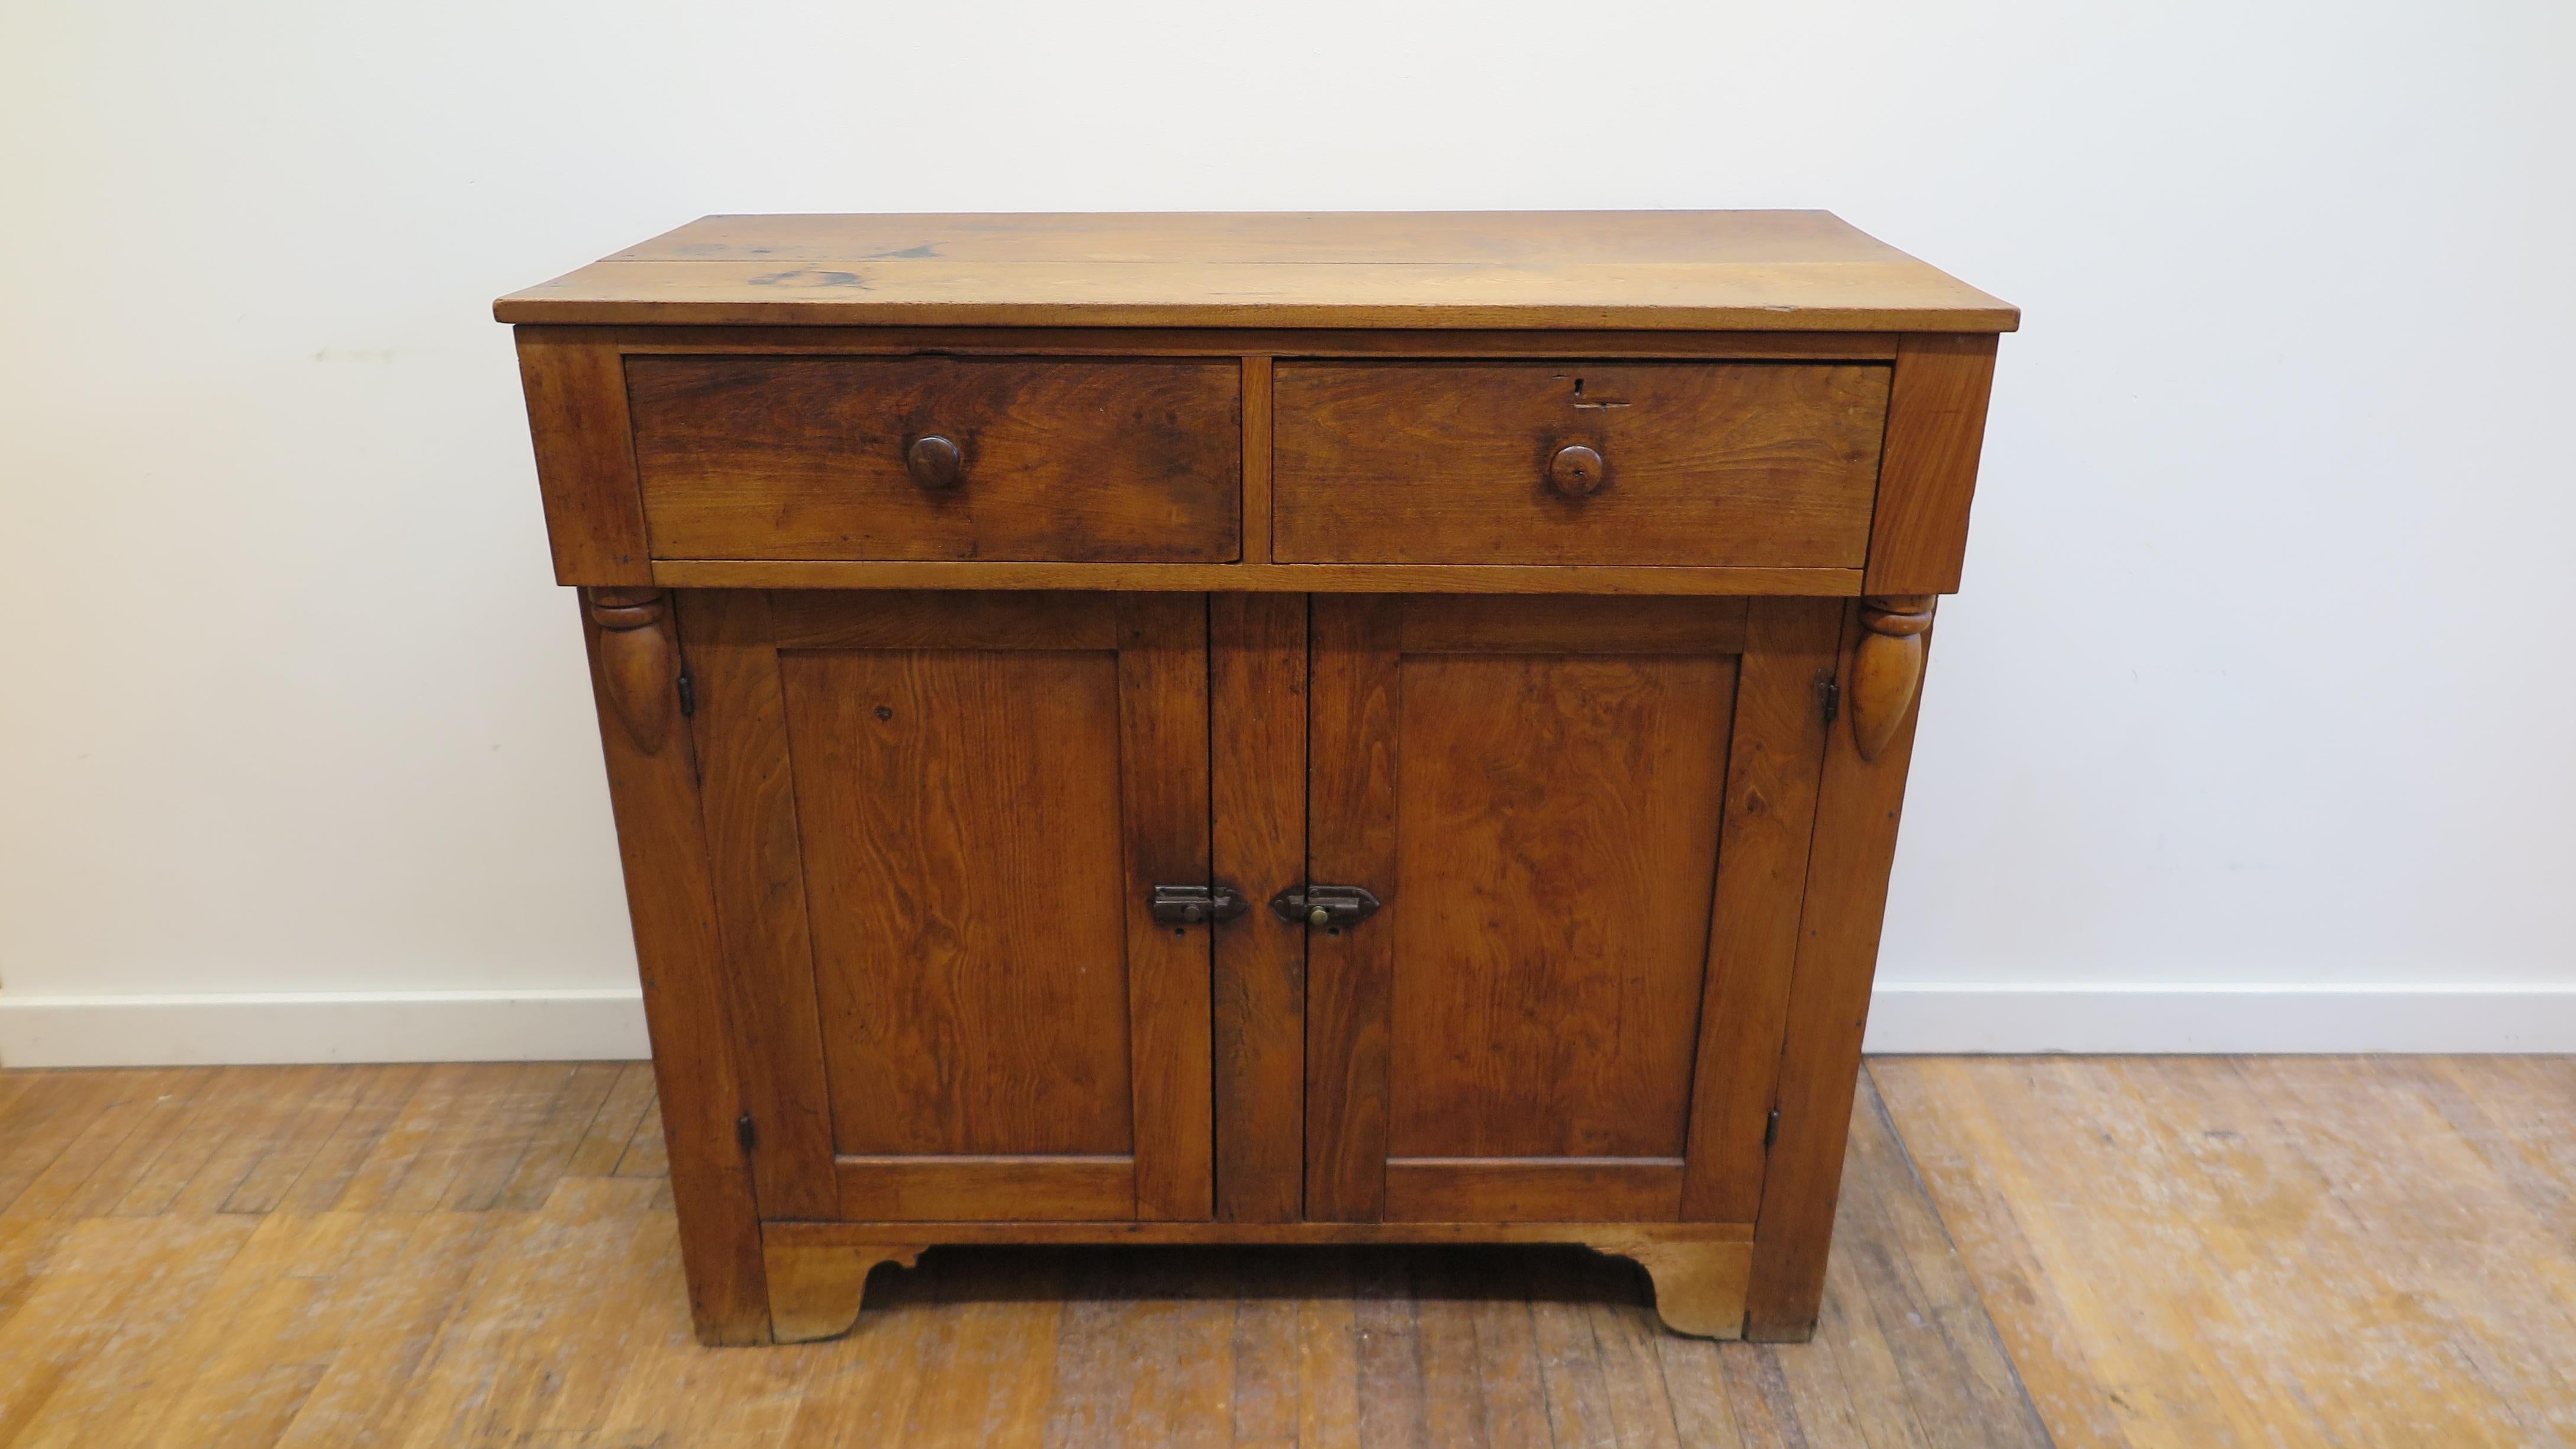 19th century American sideboard cabinet sever. American rustic sideboard cabinet of chestnut wood early 1800's. Two top drawers with a lower cabinet with shelf. Authentic American cabinet sideboard signed A. Kostenbader, Core & Simmons, No16